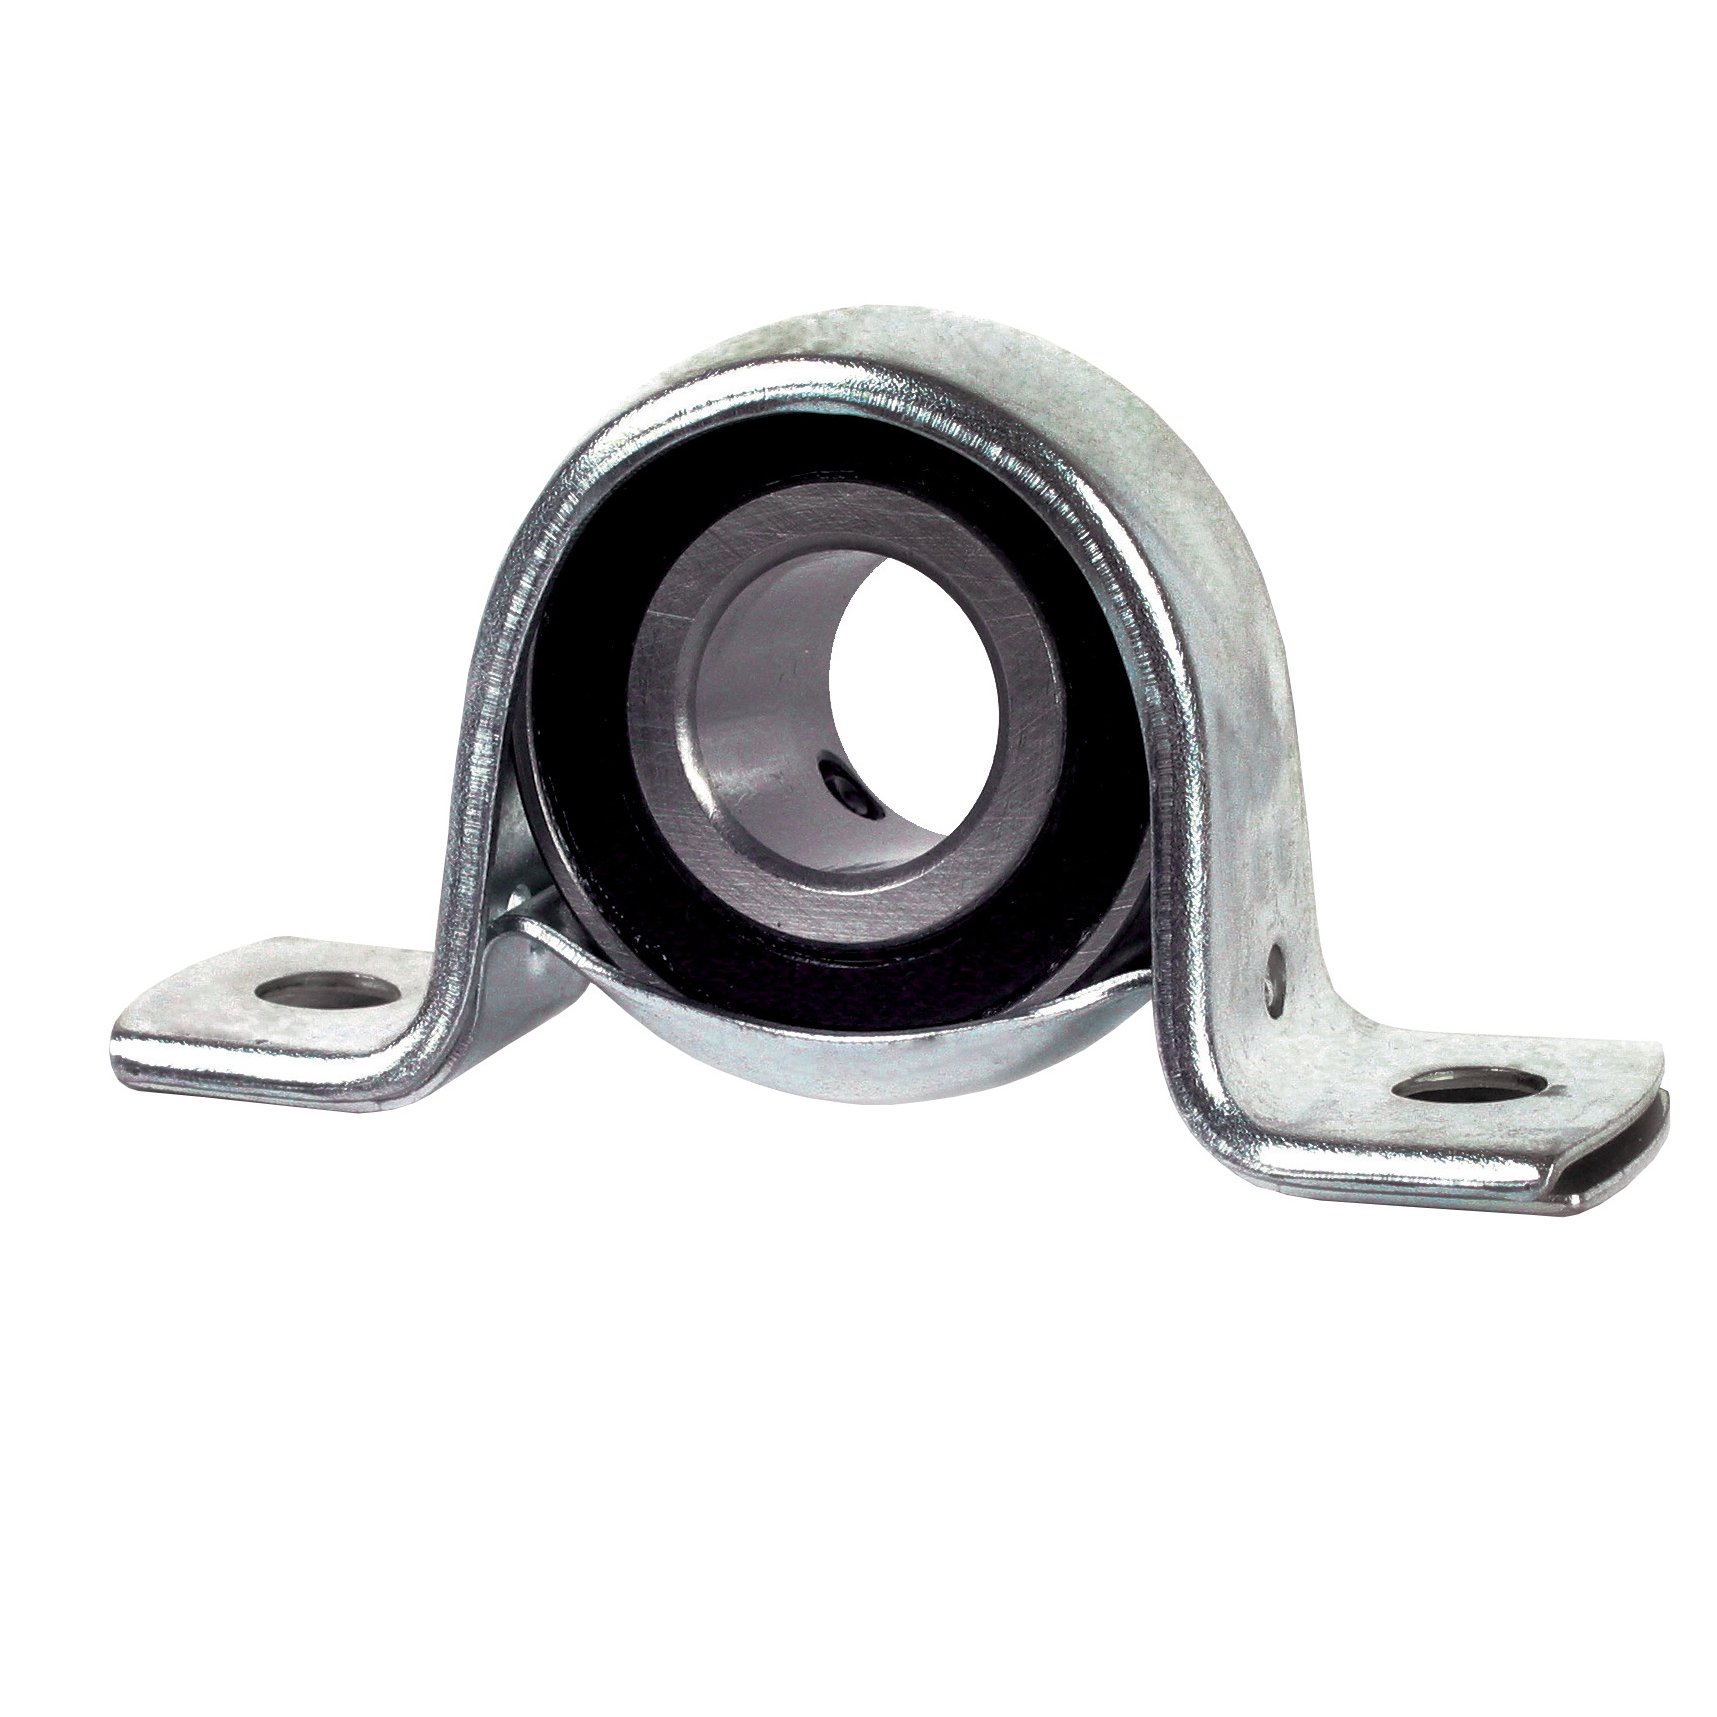 Pressed steel flanged bearing for light loads - Sheet steel - 2 fixing holes - Light